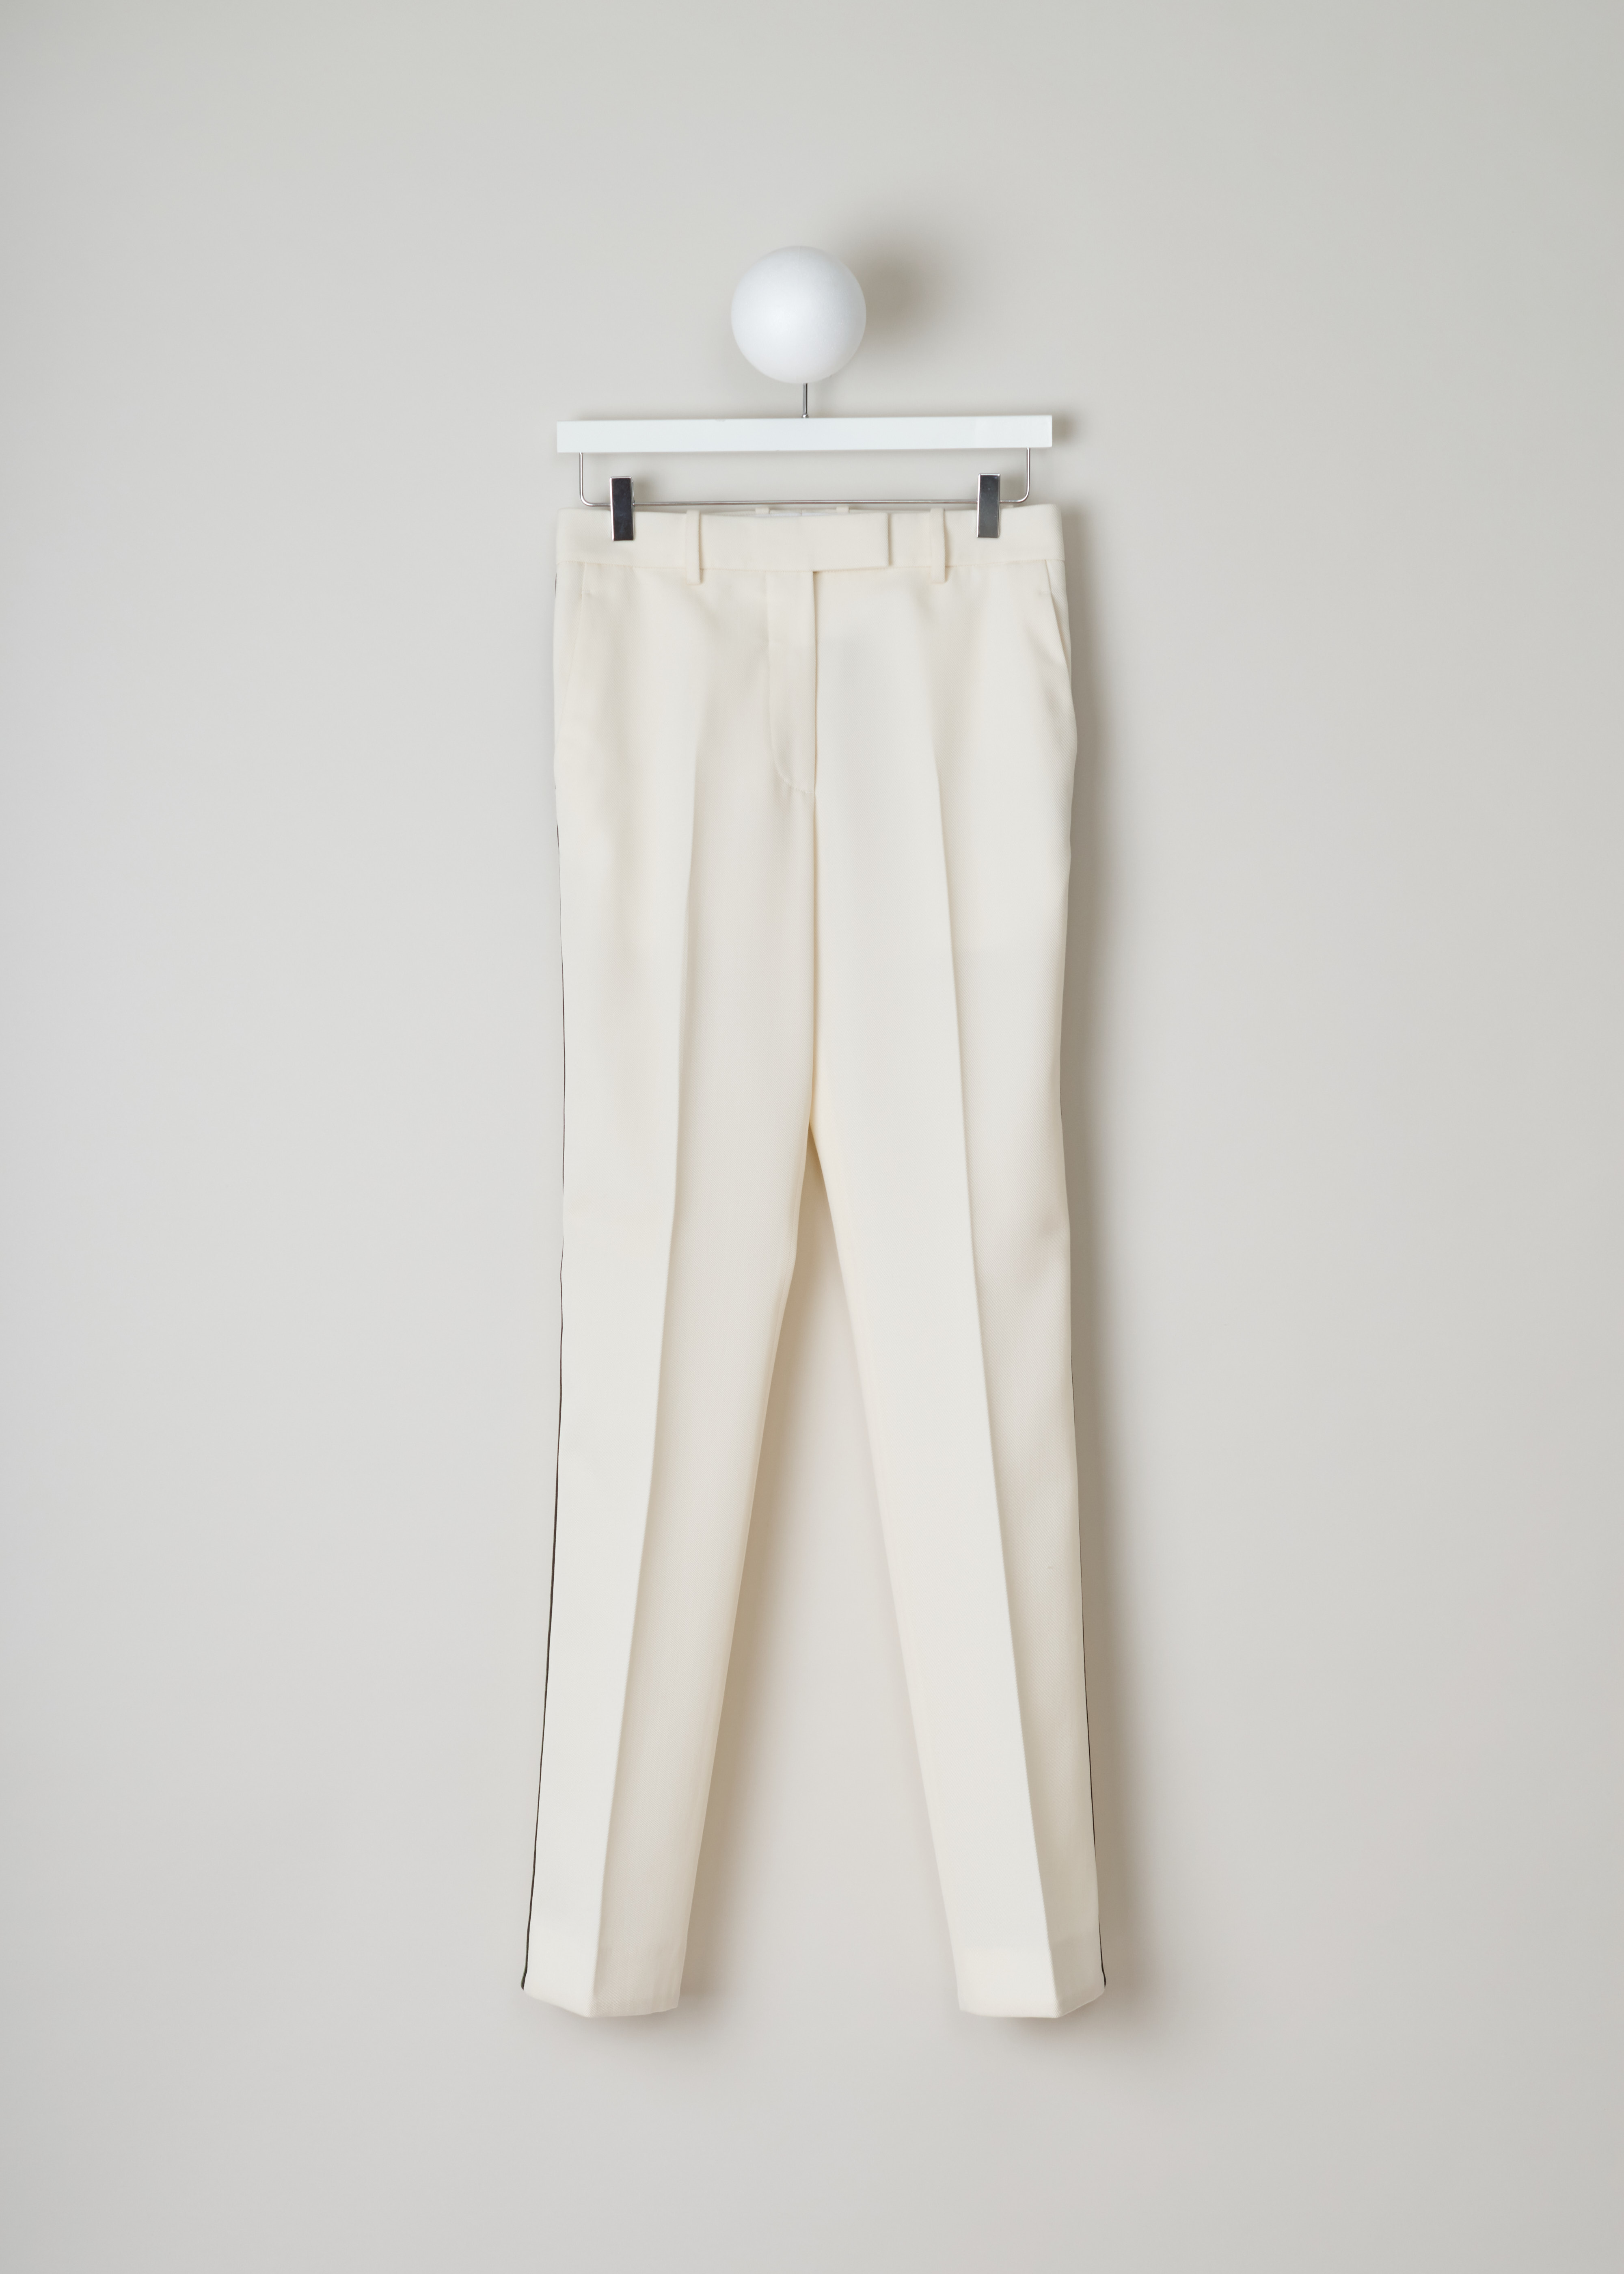 Calvin Klein 205W39NYC Off-white pants with ribbon trim
74WWPA47_W023_101 white front. Off-white wool pants with a green and black side ribbon trim.
These straight pants have two slant pockets on the front and a welt pocket on the back.